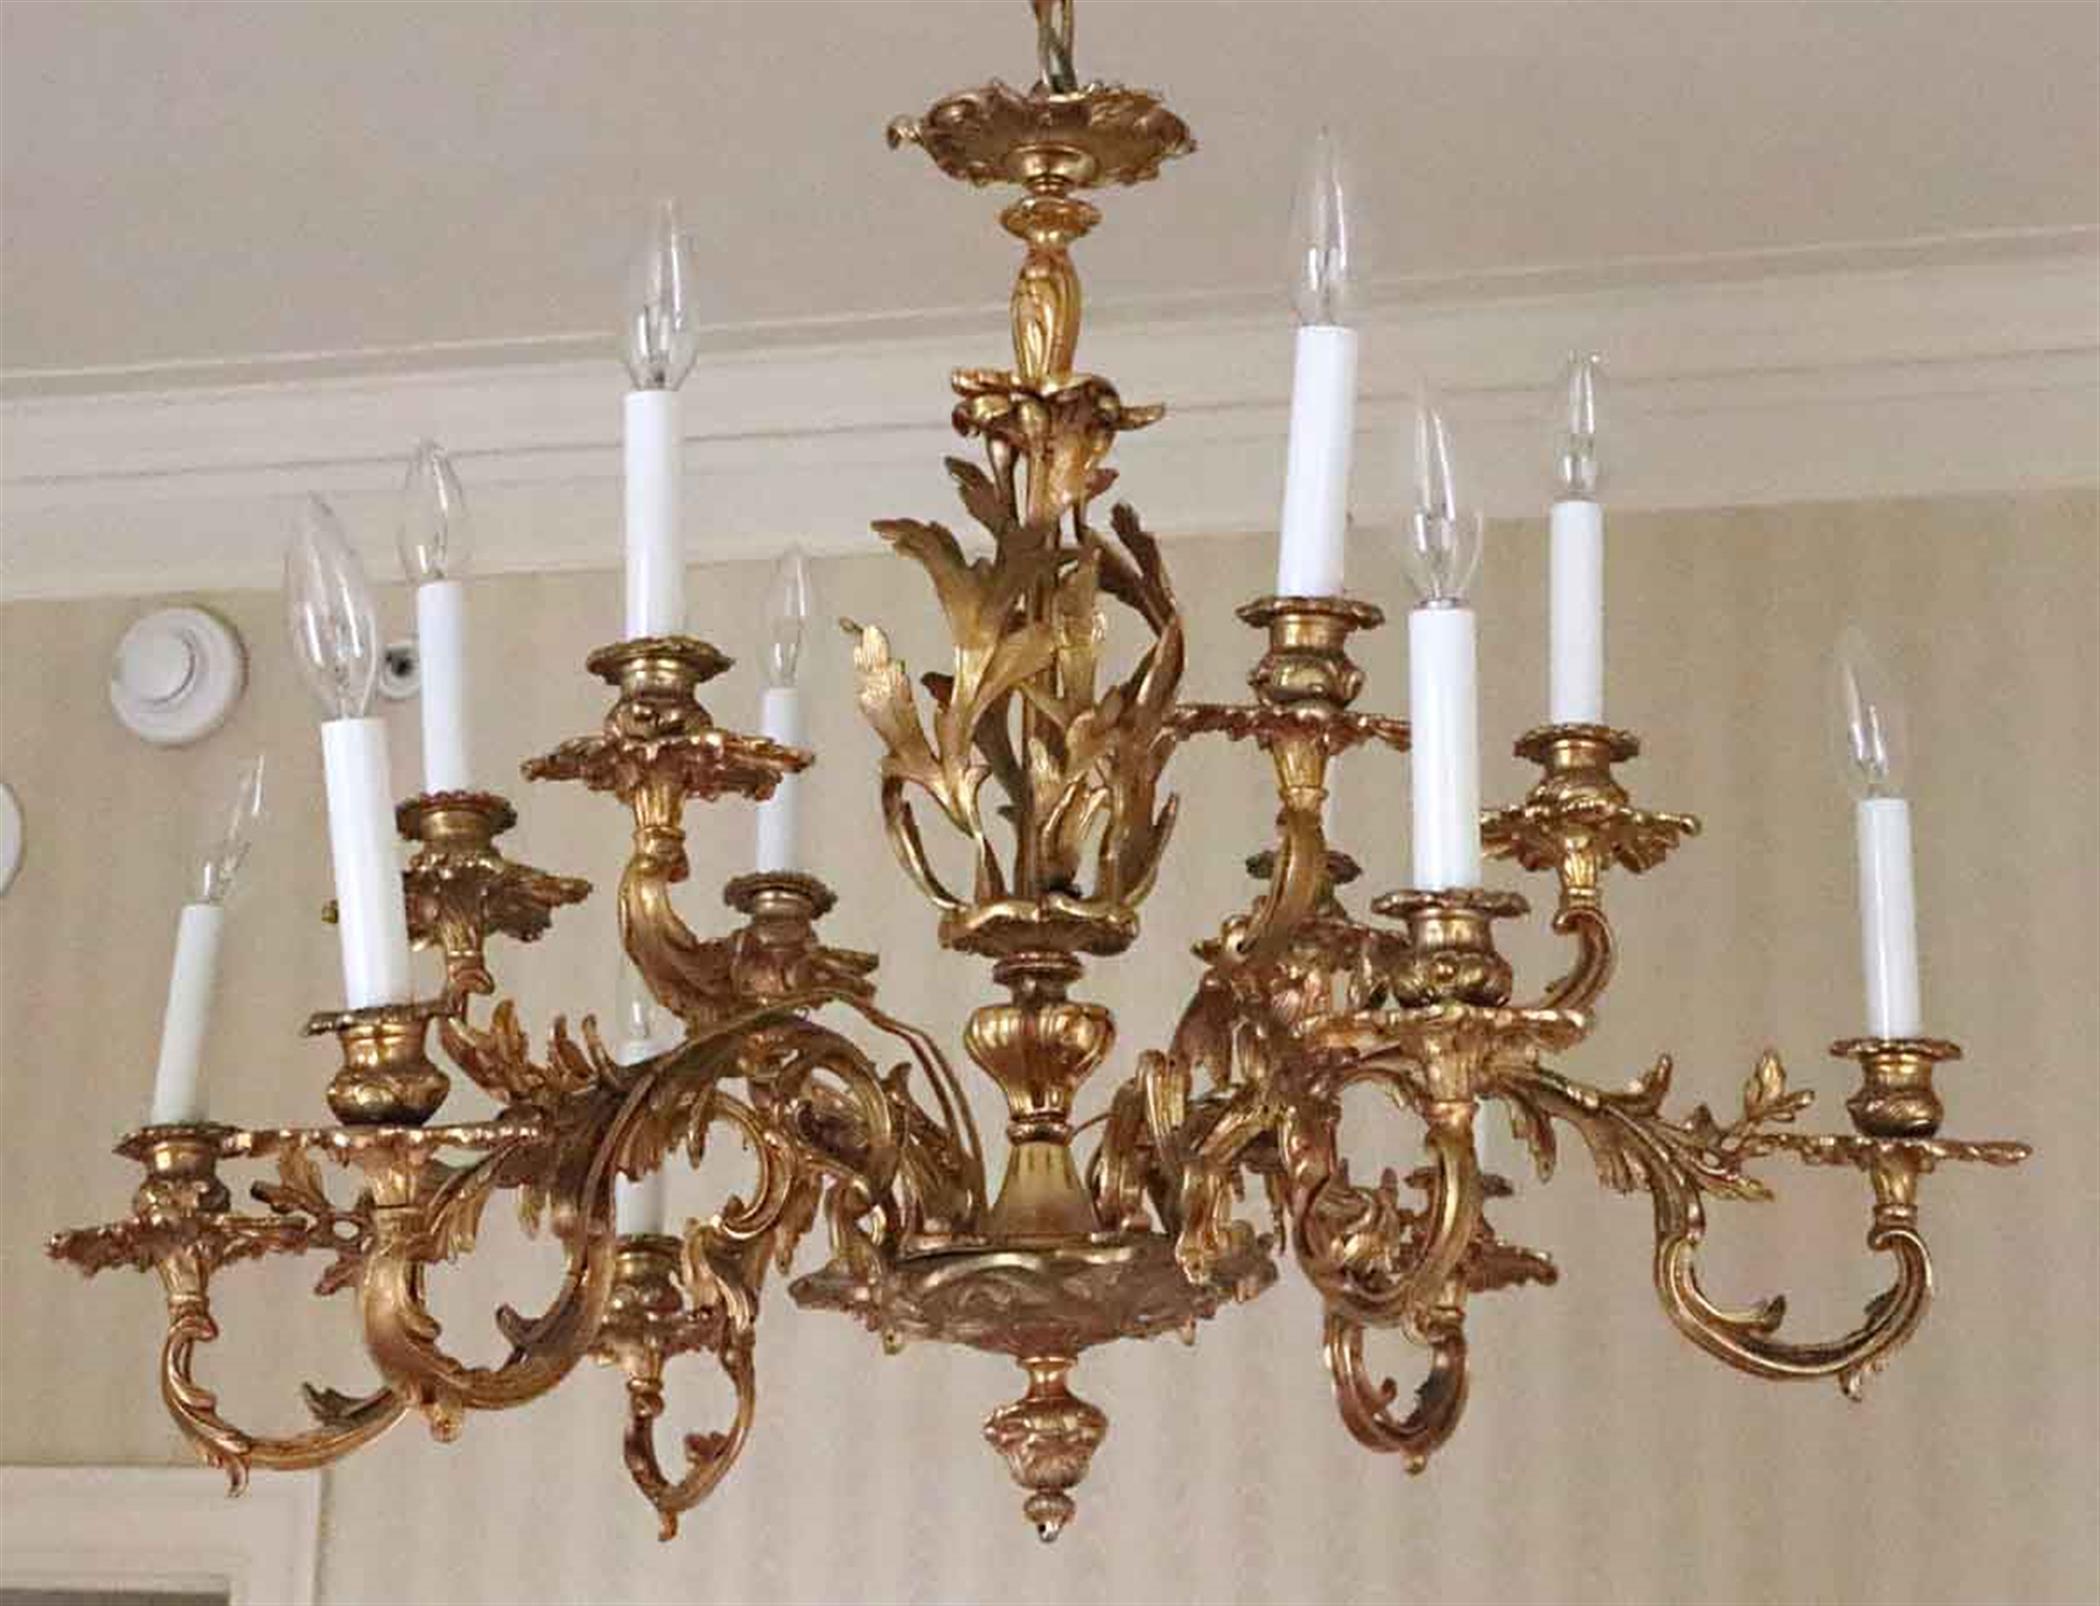 1980s NYC Waldorf Astoria Hotel organic gold gilt cast bronze filigree 12 arm chandelier from the Waldorf Astoria Towers. The gold gilt shows some wear, but adds to the charm of this historic chandelier. A Waldorf Astoria authenticity card included